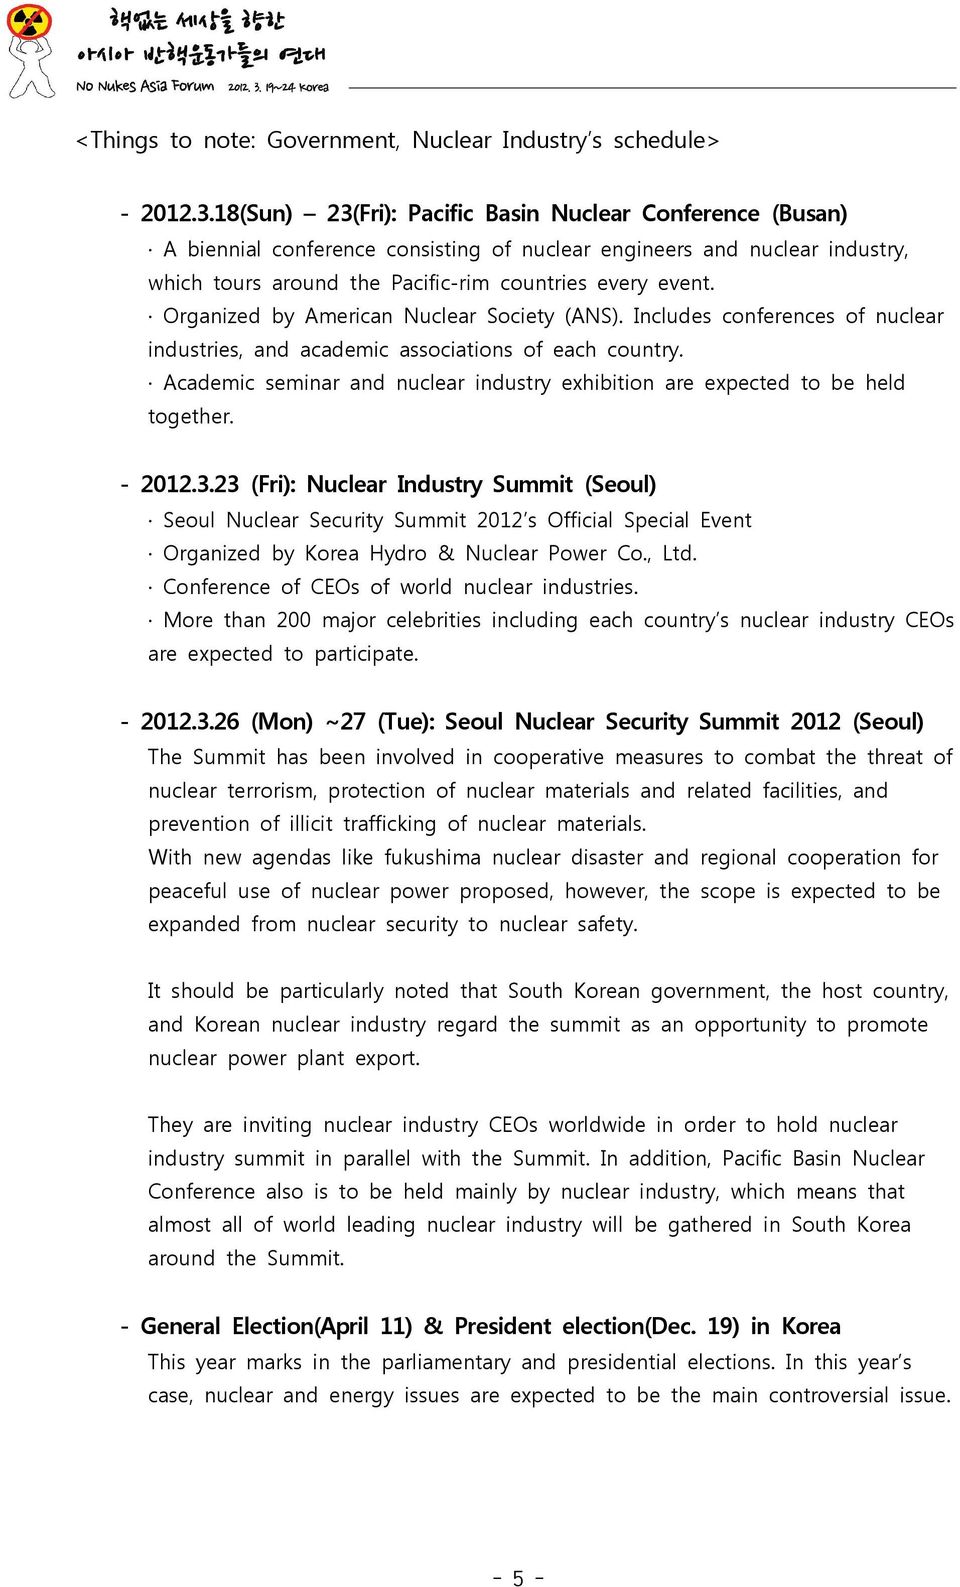 Organized by American Nuclear Society (ANS). Includes conferences of nuclear industries, and academic associations of each country.